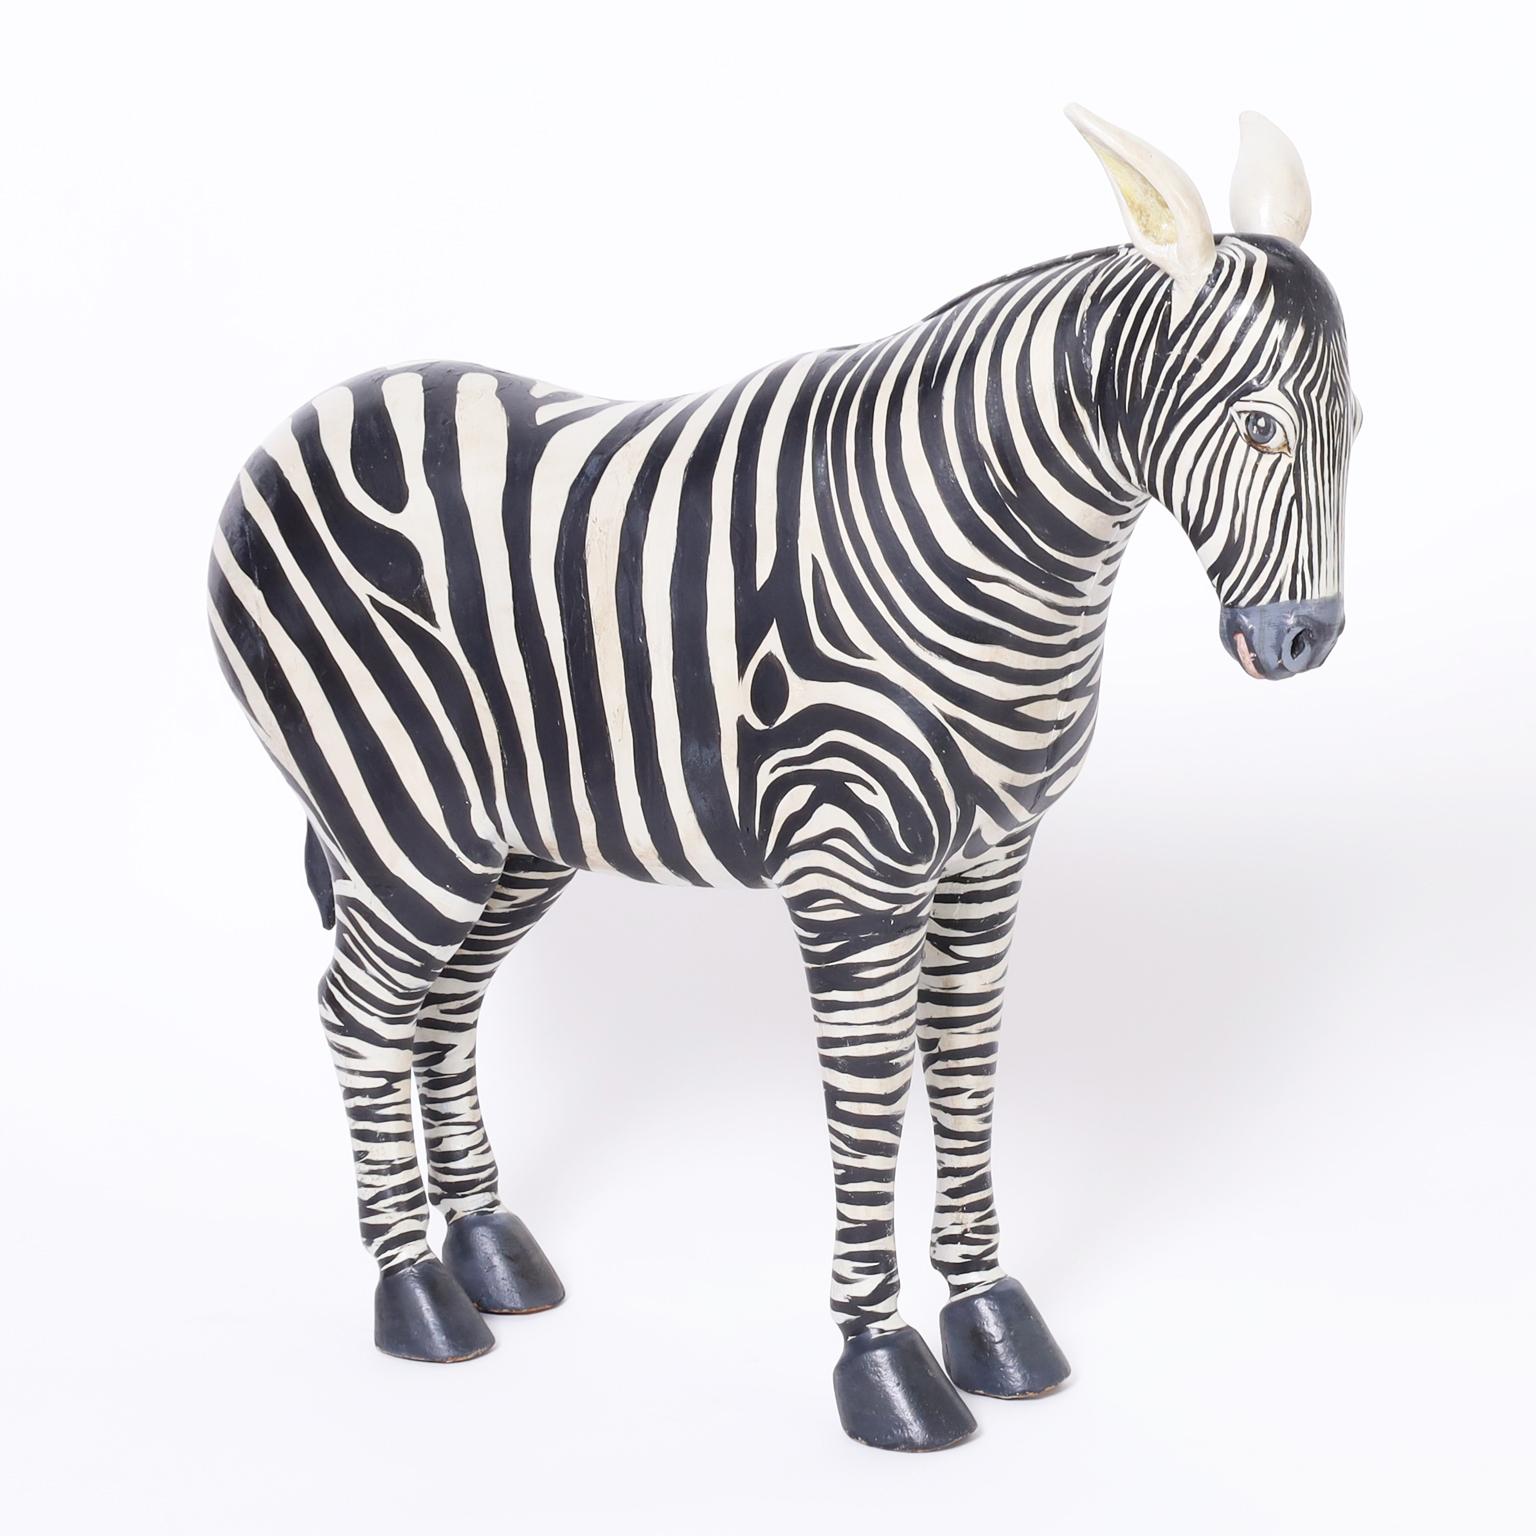 Striking pair of mid century zebra models hand carved in hardwood and hand decorated with the iconic zebra stripes.